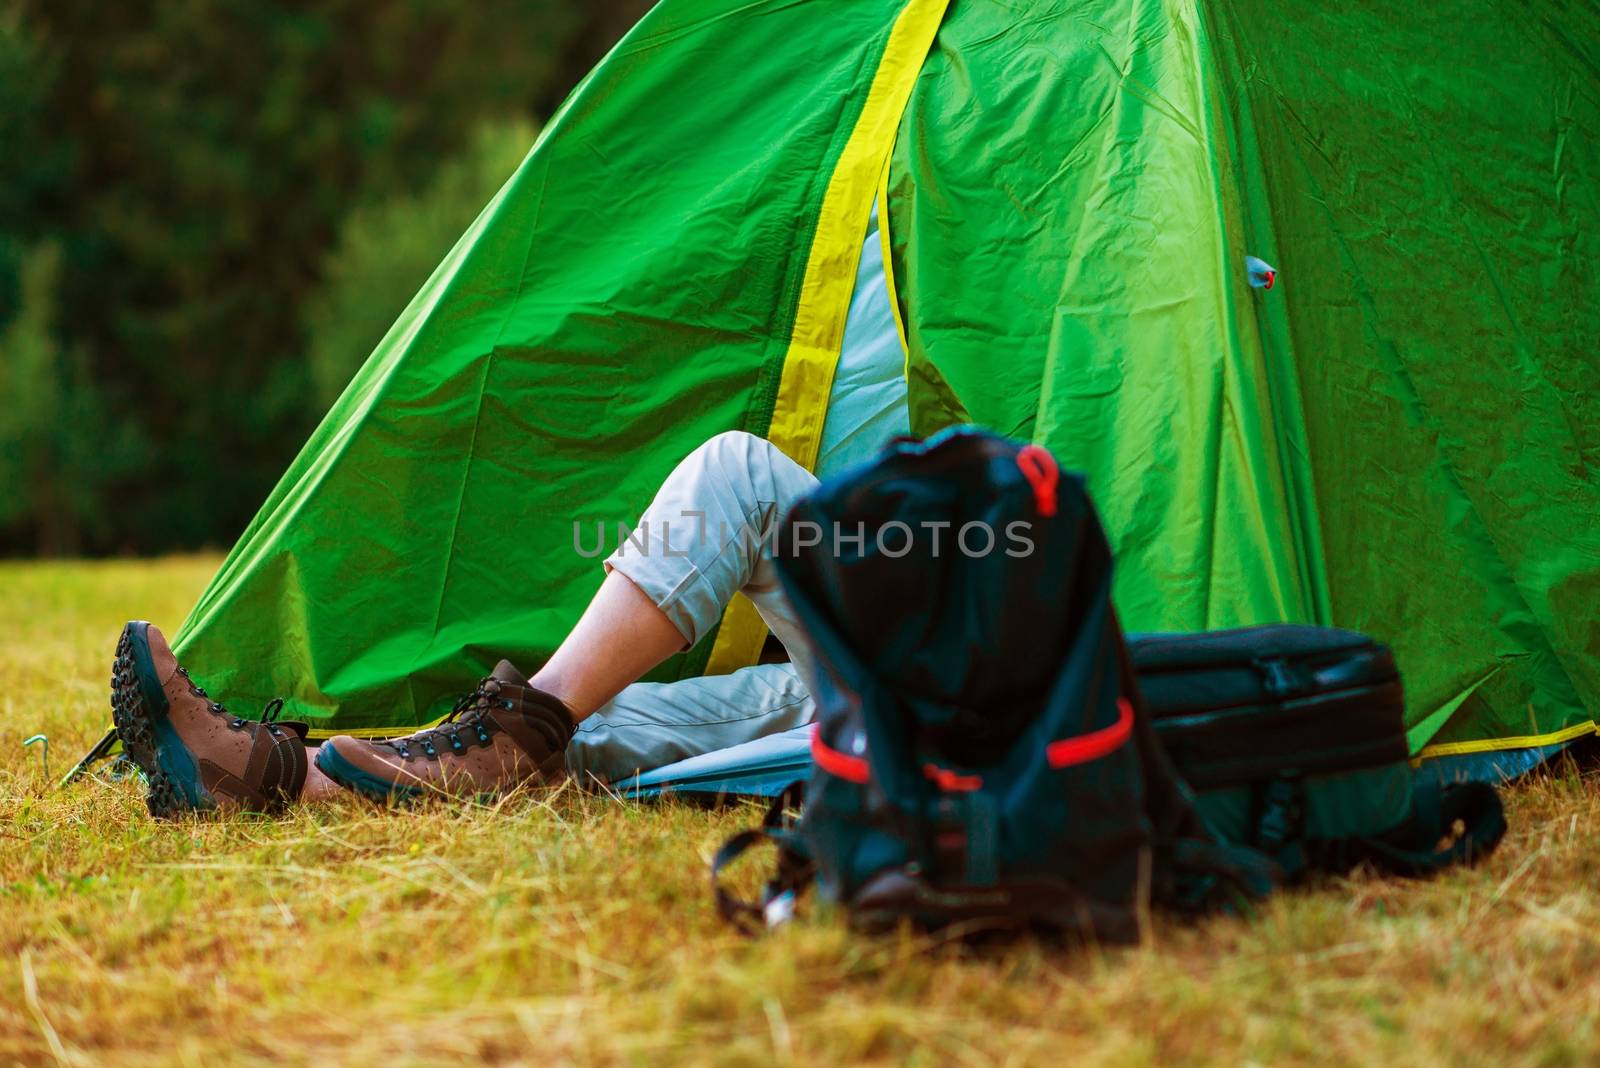 Resting Hiker in His Medium Size Tent. Wild Campsite. Hiking and Tent Camping Theme.